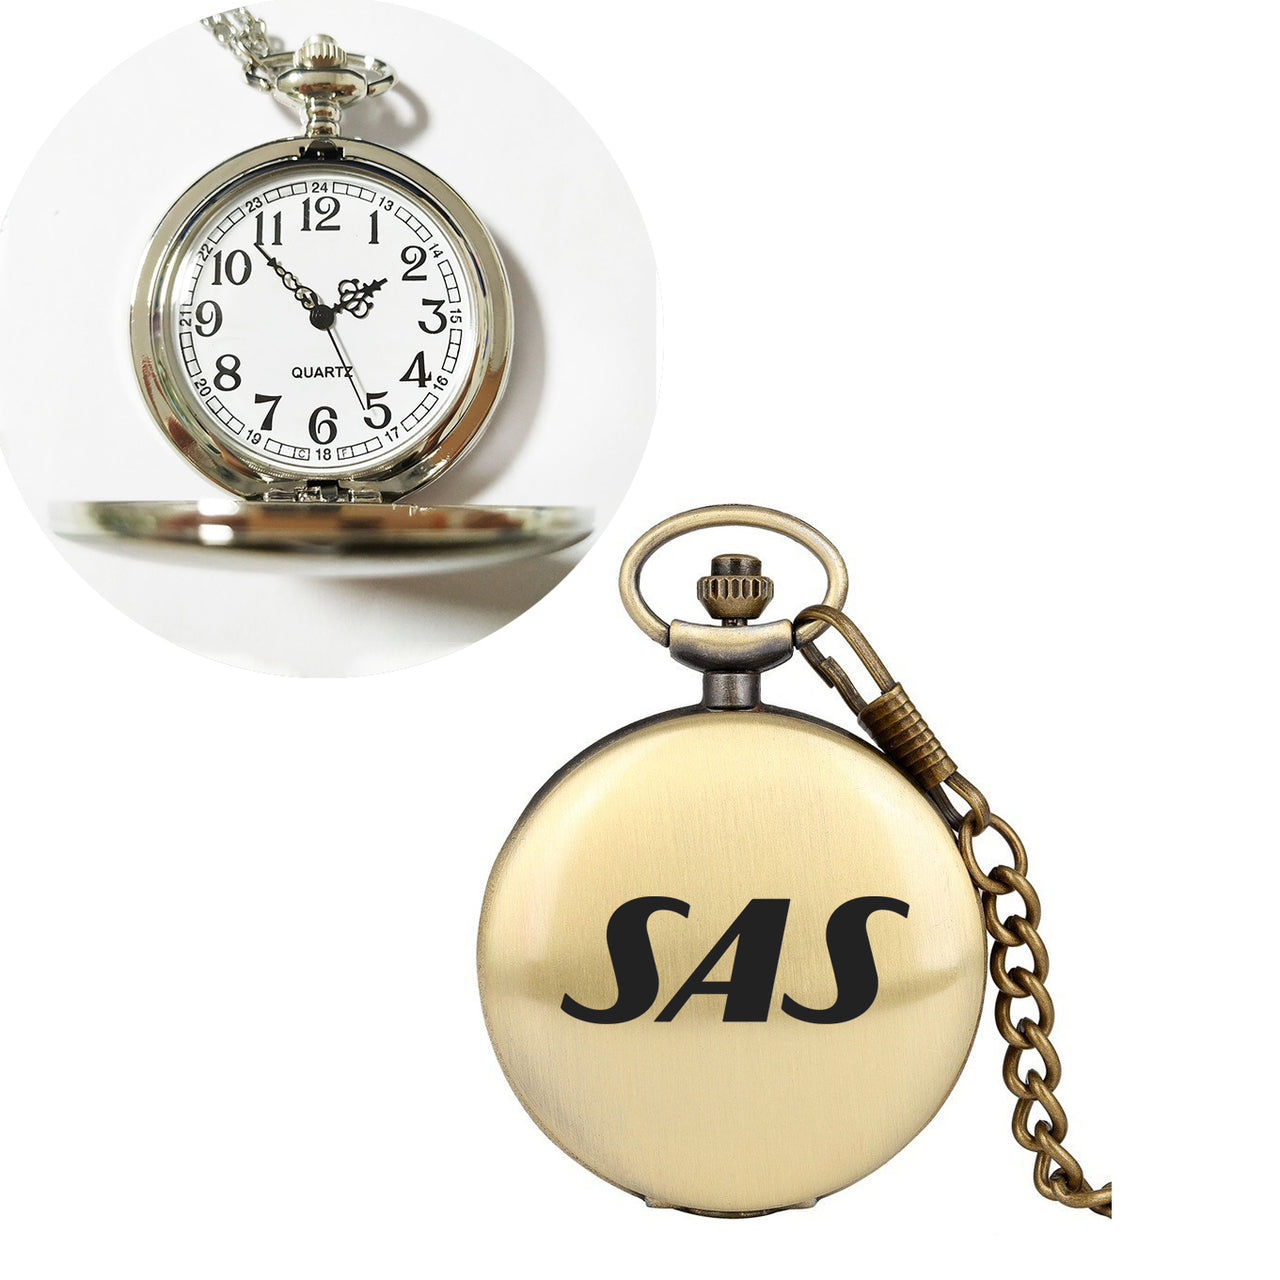 SAS Airlines Airlines Designed Pocket Watches